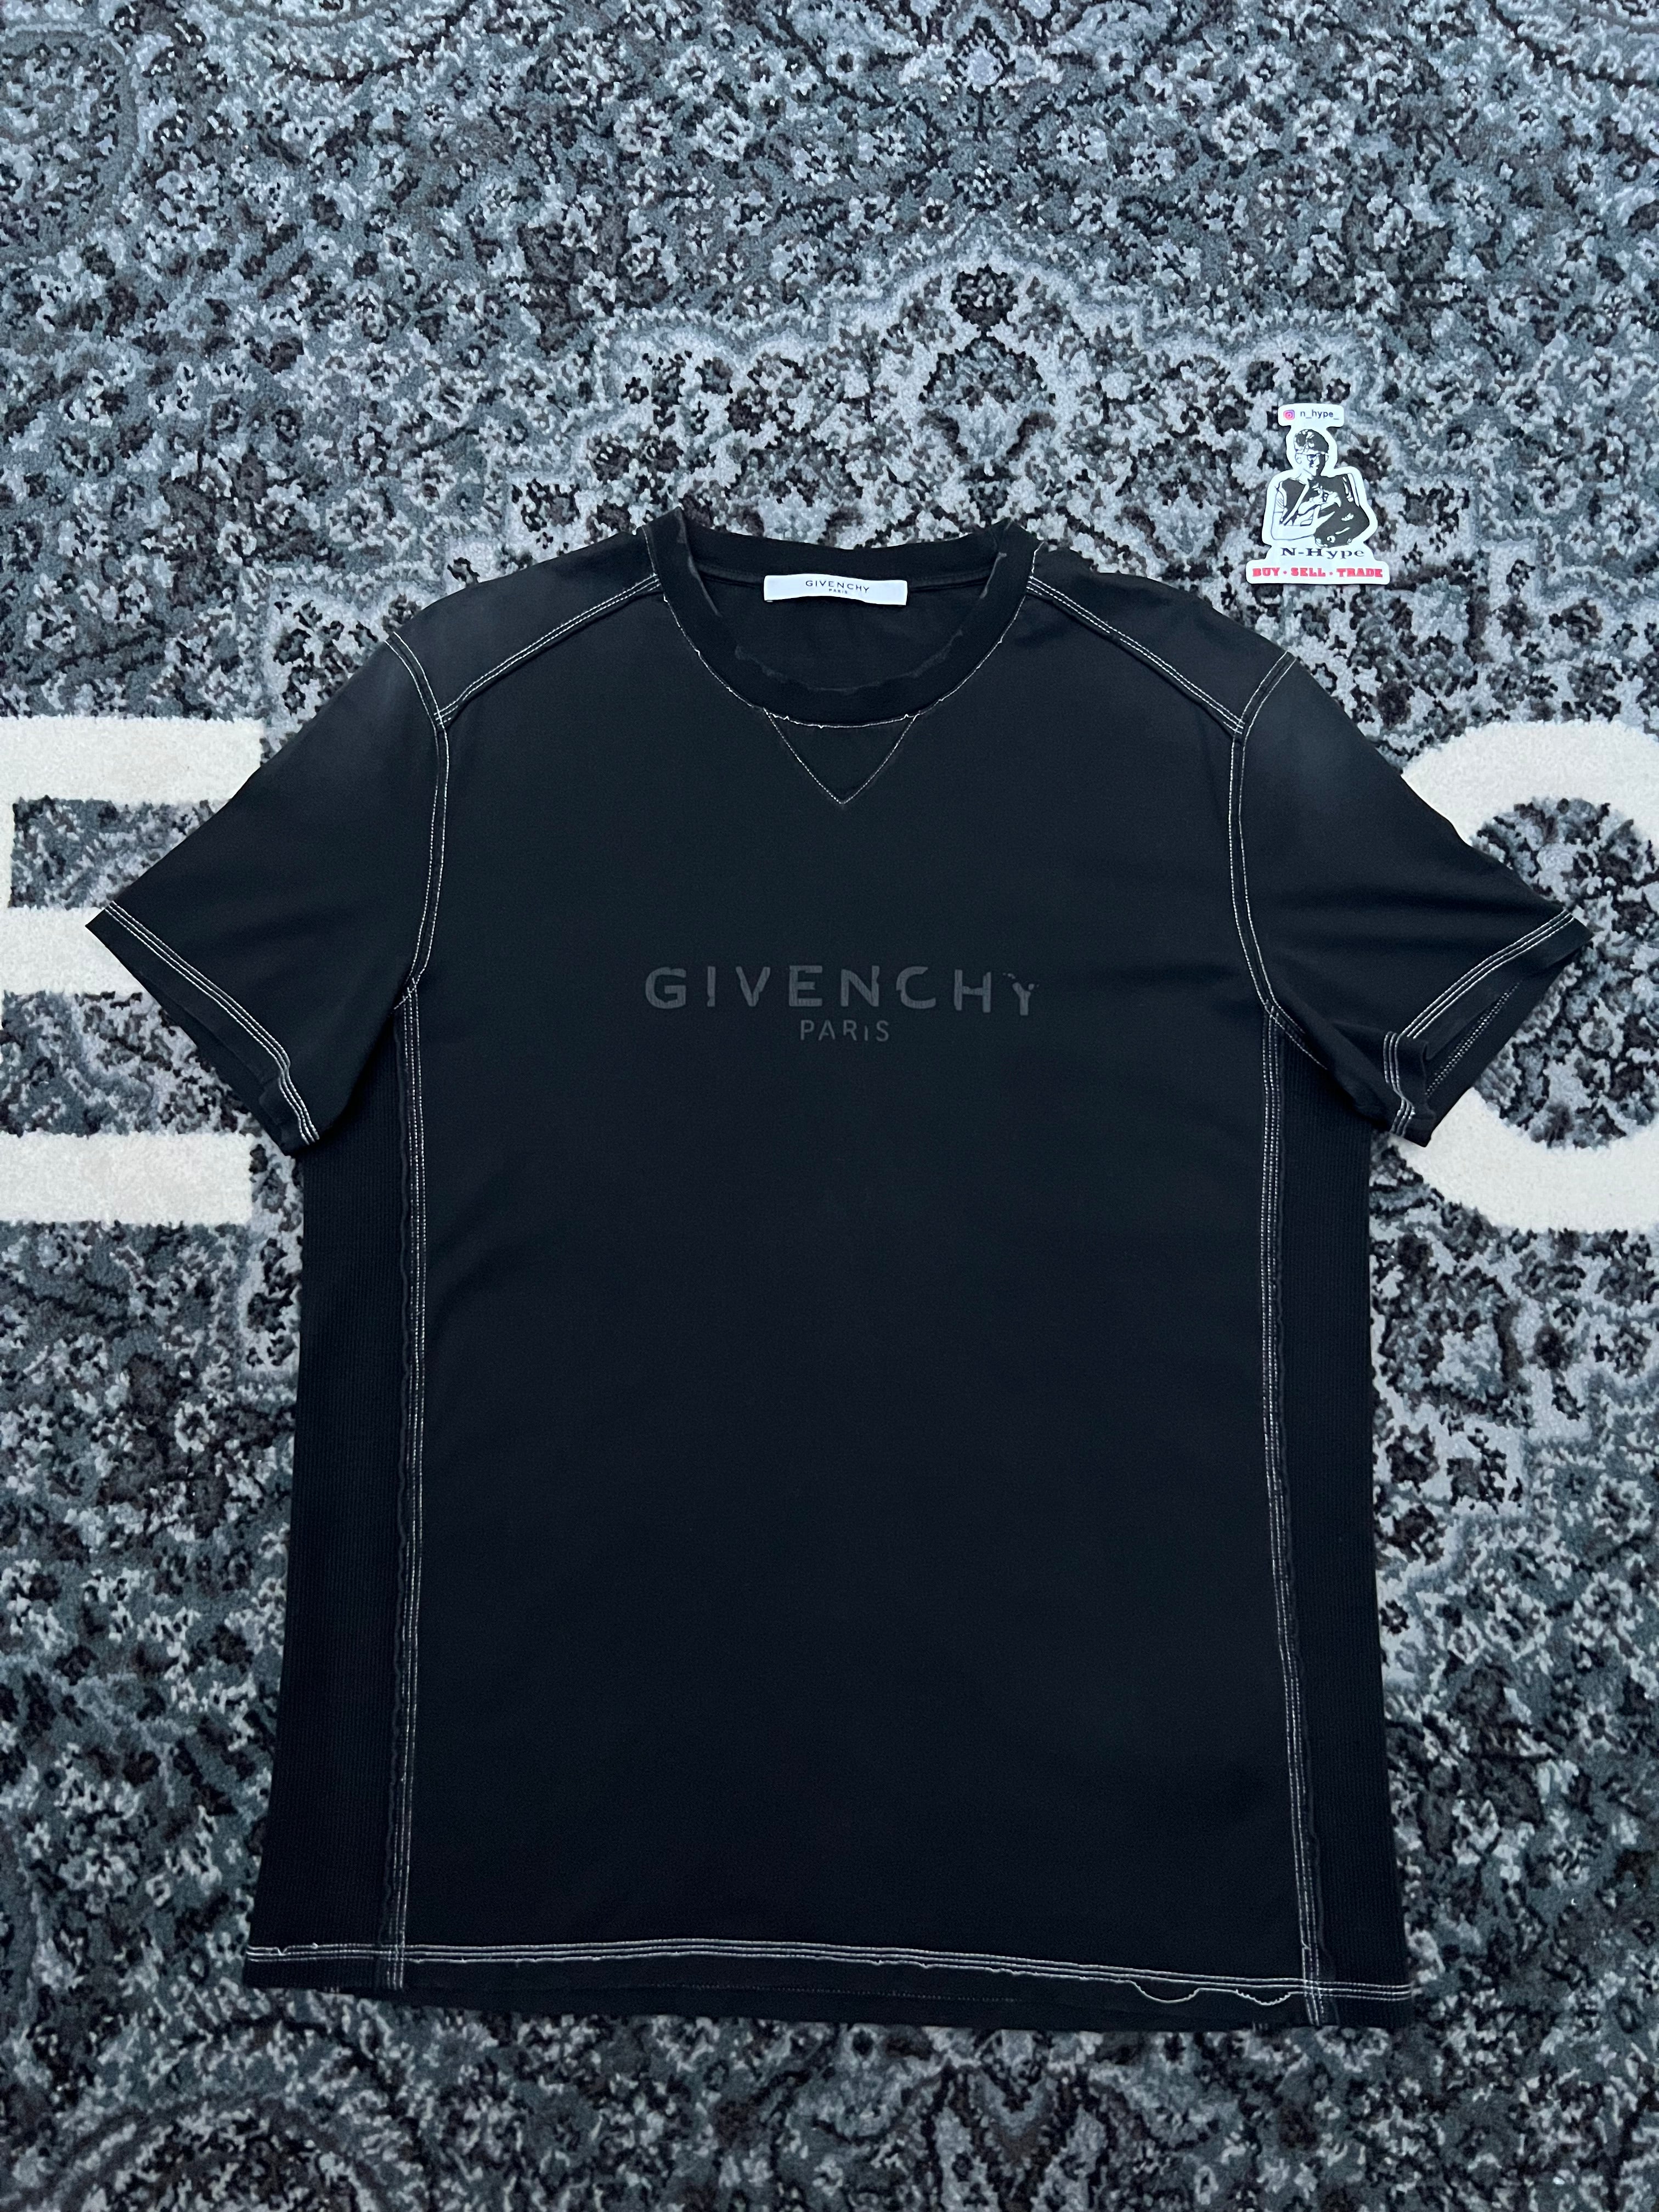 Givenchy Pre-owned Cotton Top Shirt Black